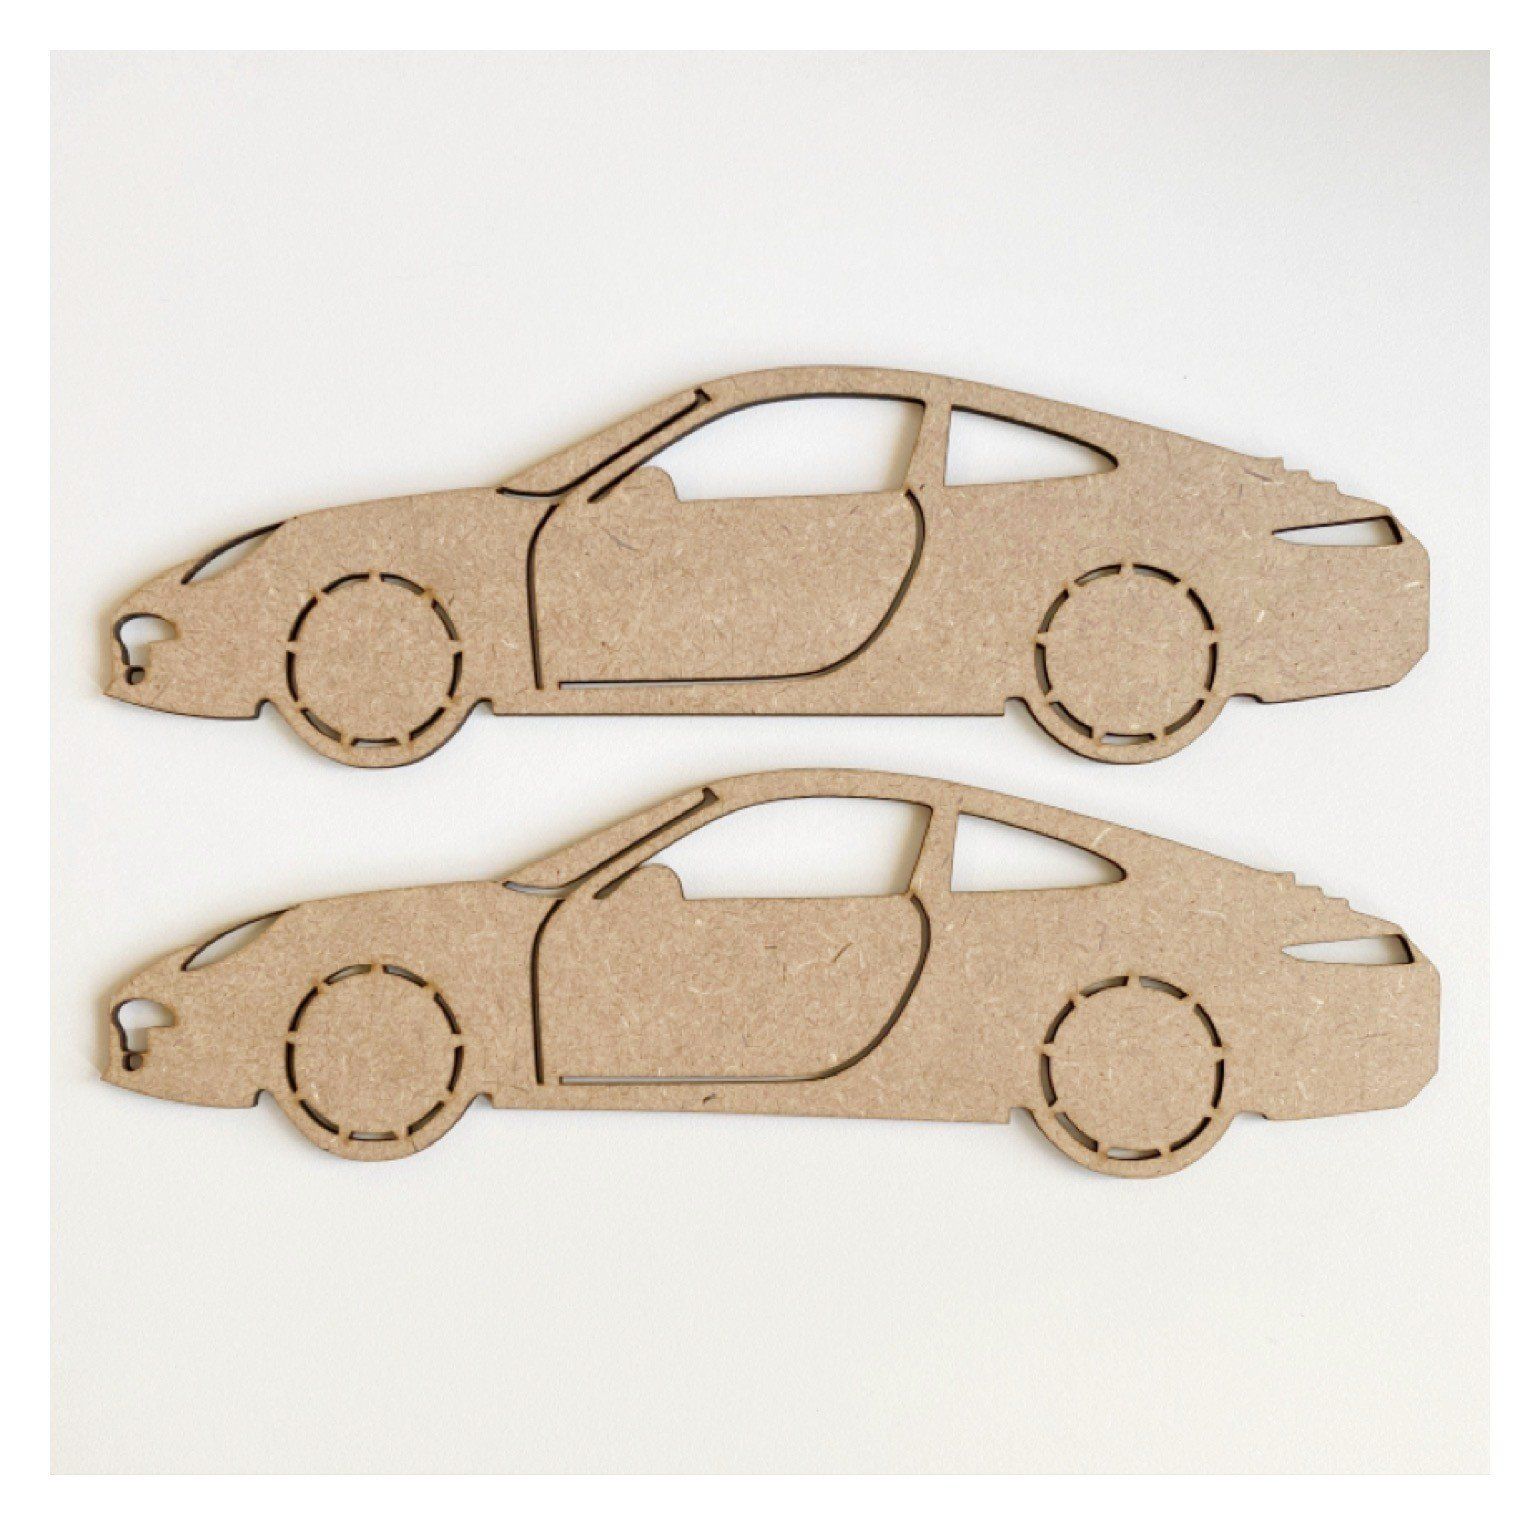 Car Porche x 2 MDF Wooden Shape DIY Cut Out Art Craft Decor - The Renmy Store Homewares & Gifts 